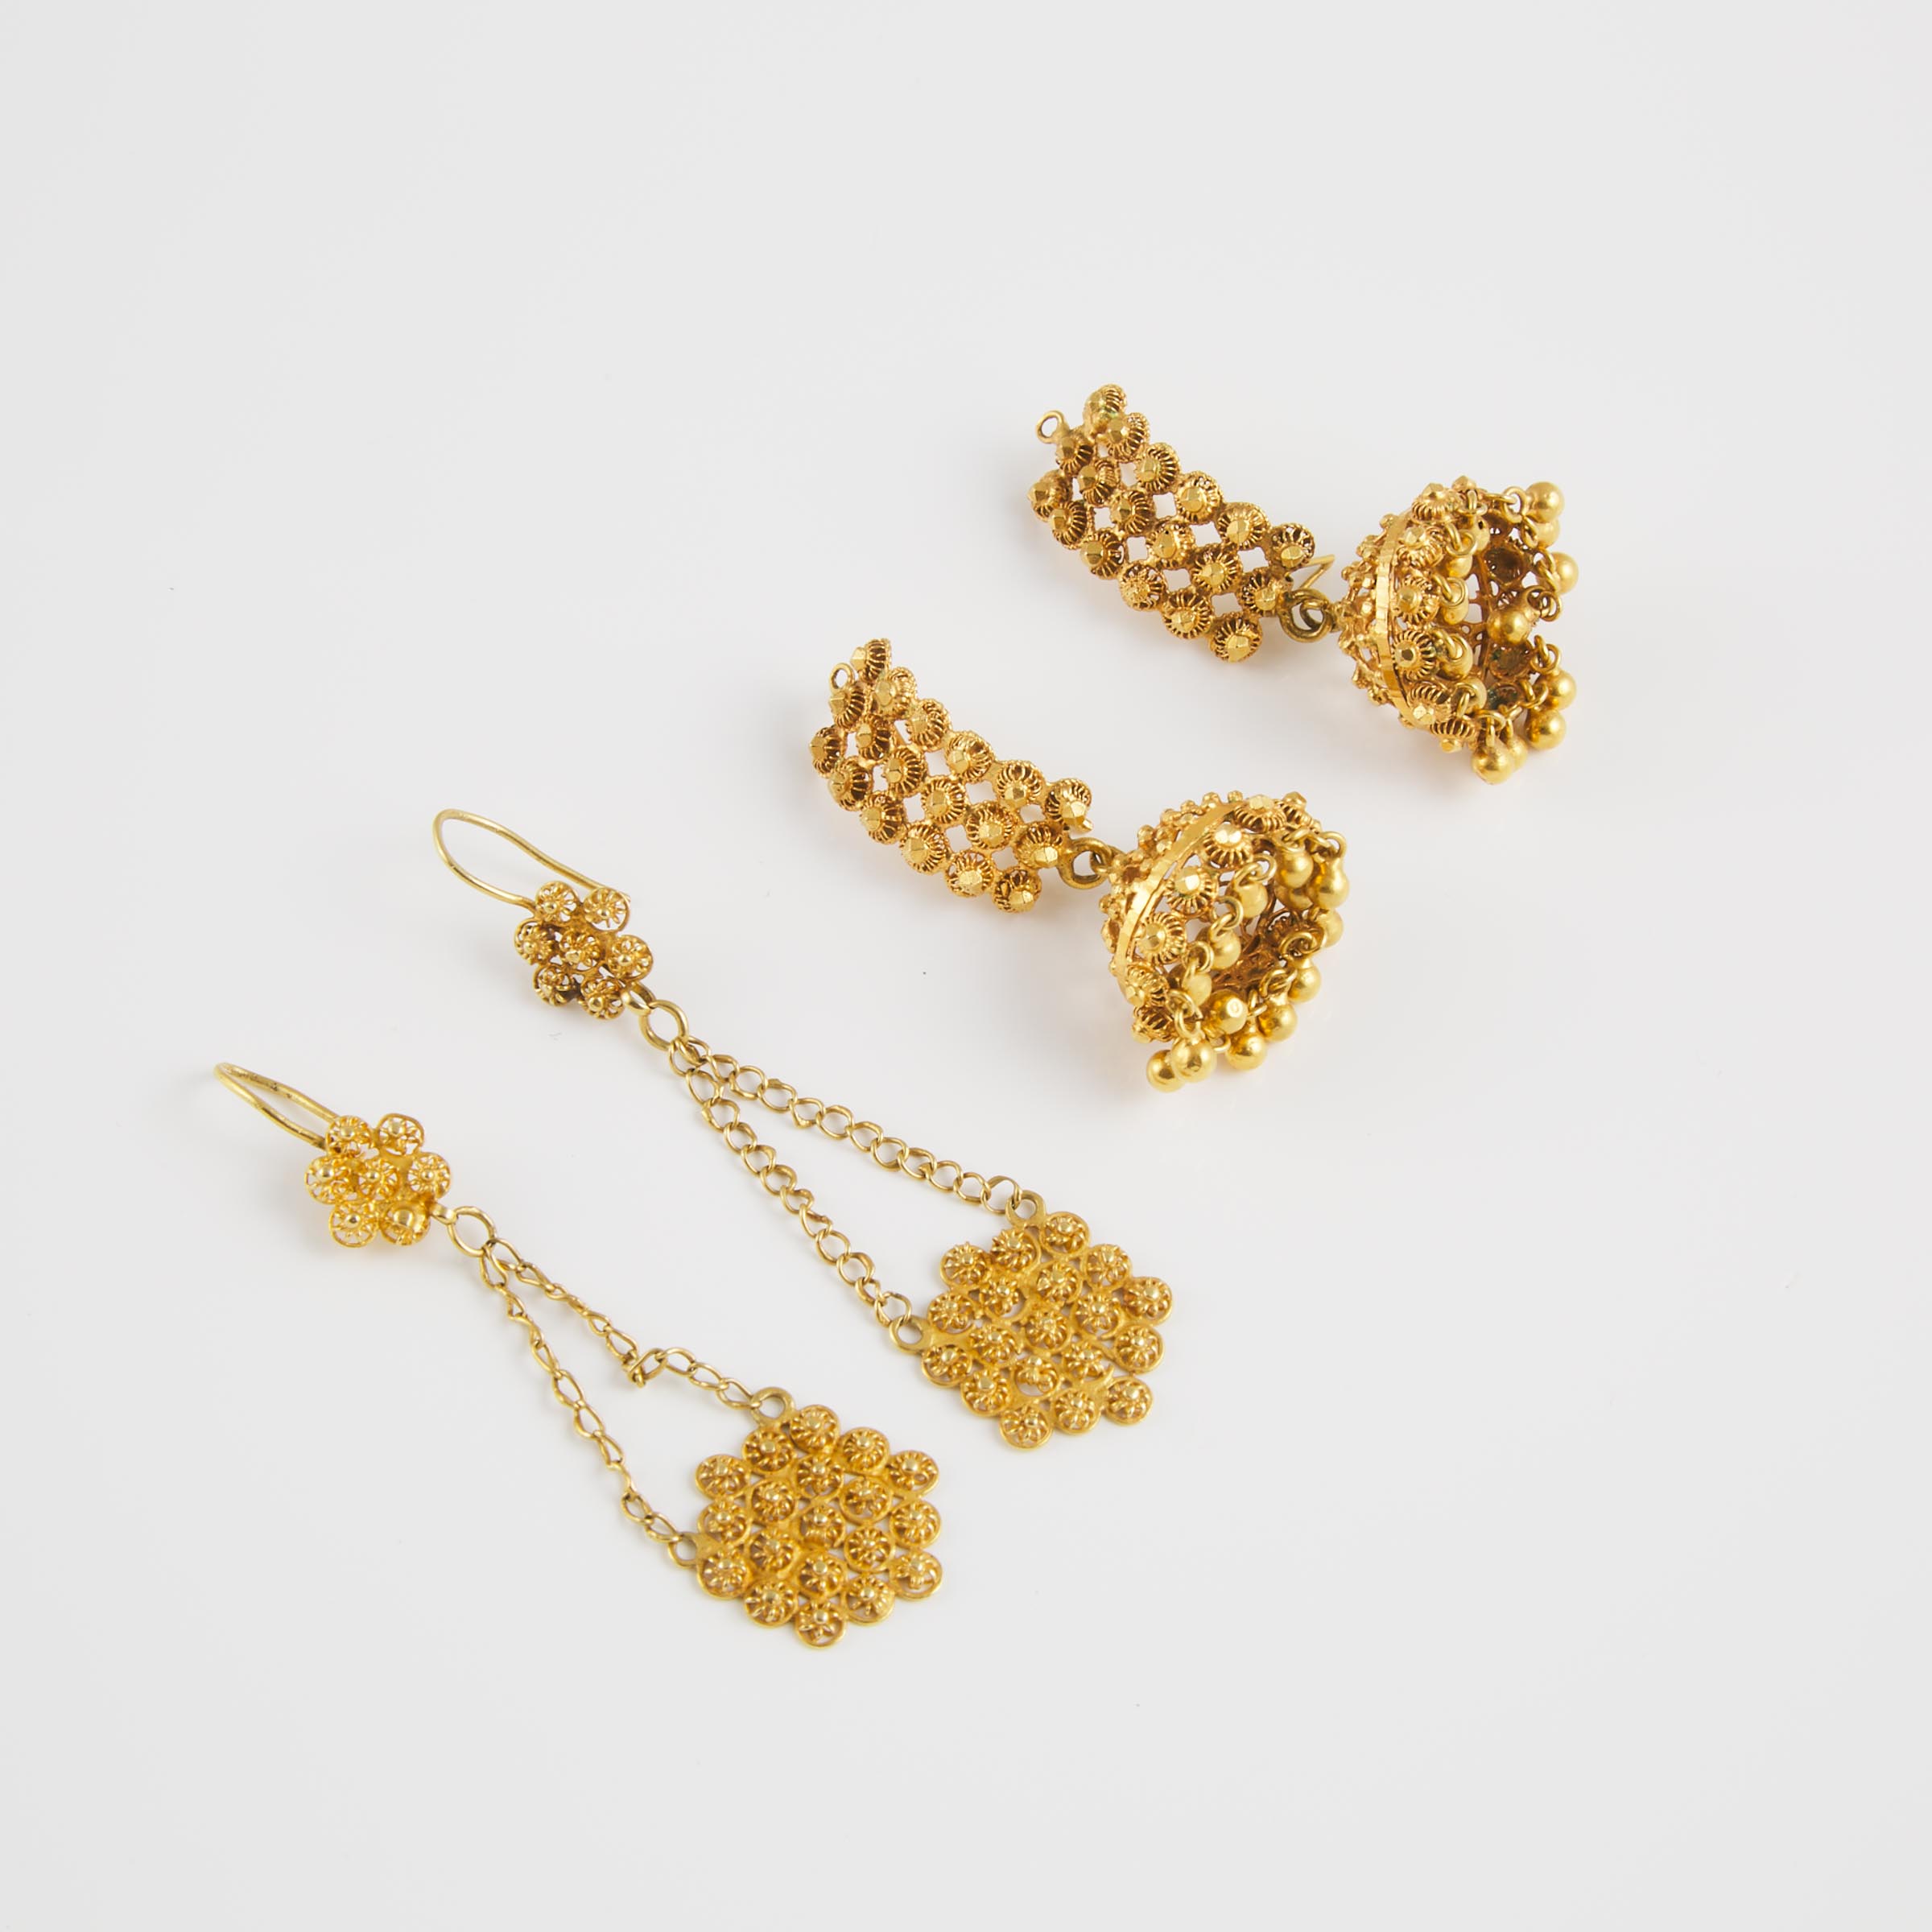 2 x 18k Yellow Gold Pairs Of Earrings